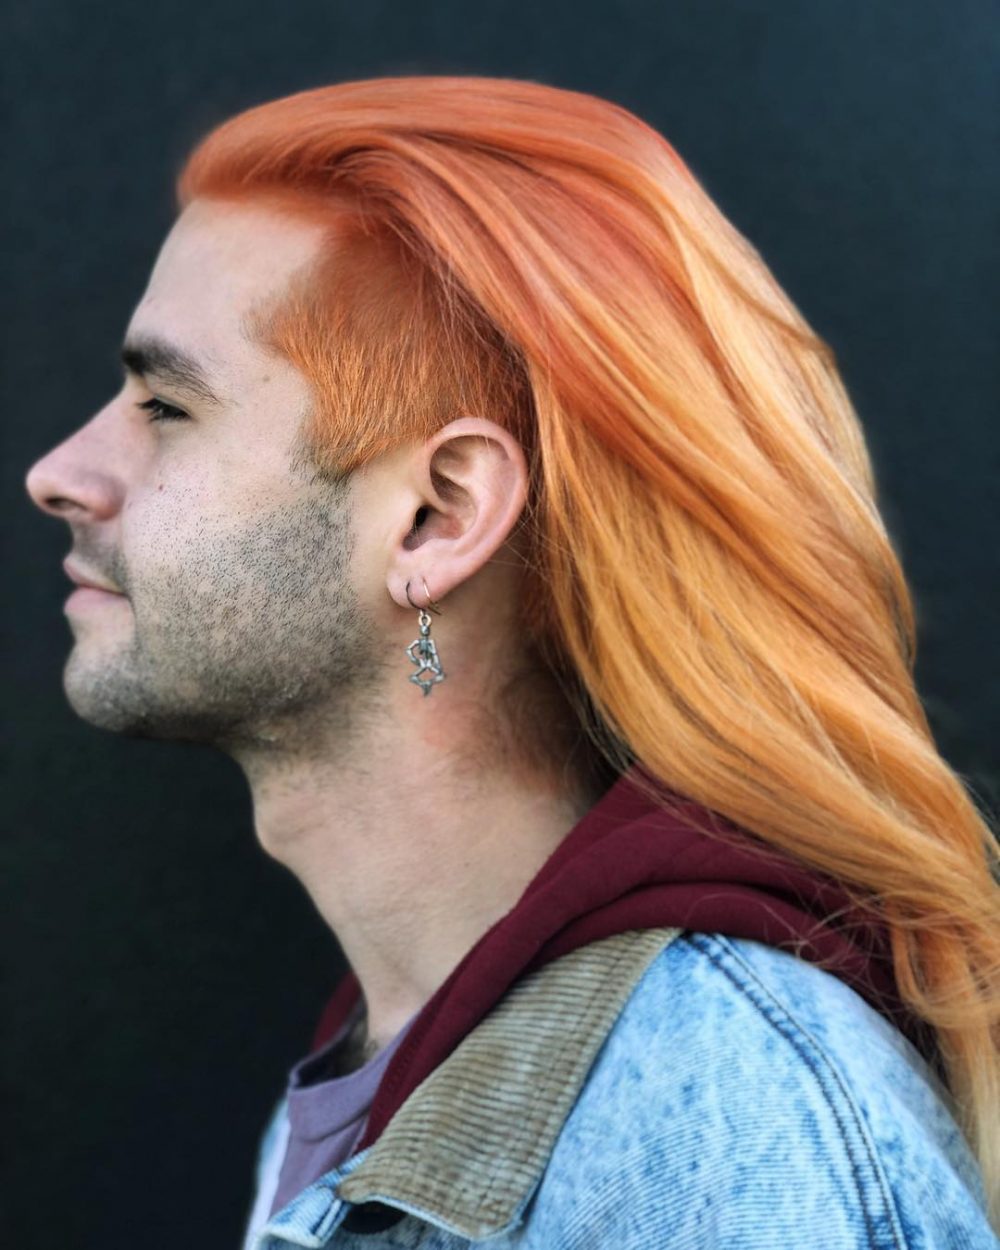 Hair Color for Men: 31 Examples Ranging from Vivids to Natural Hues